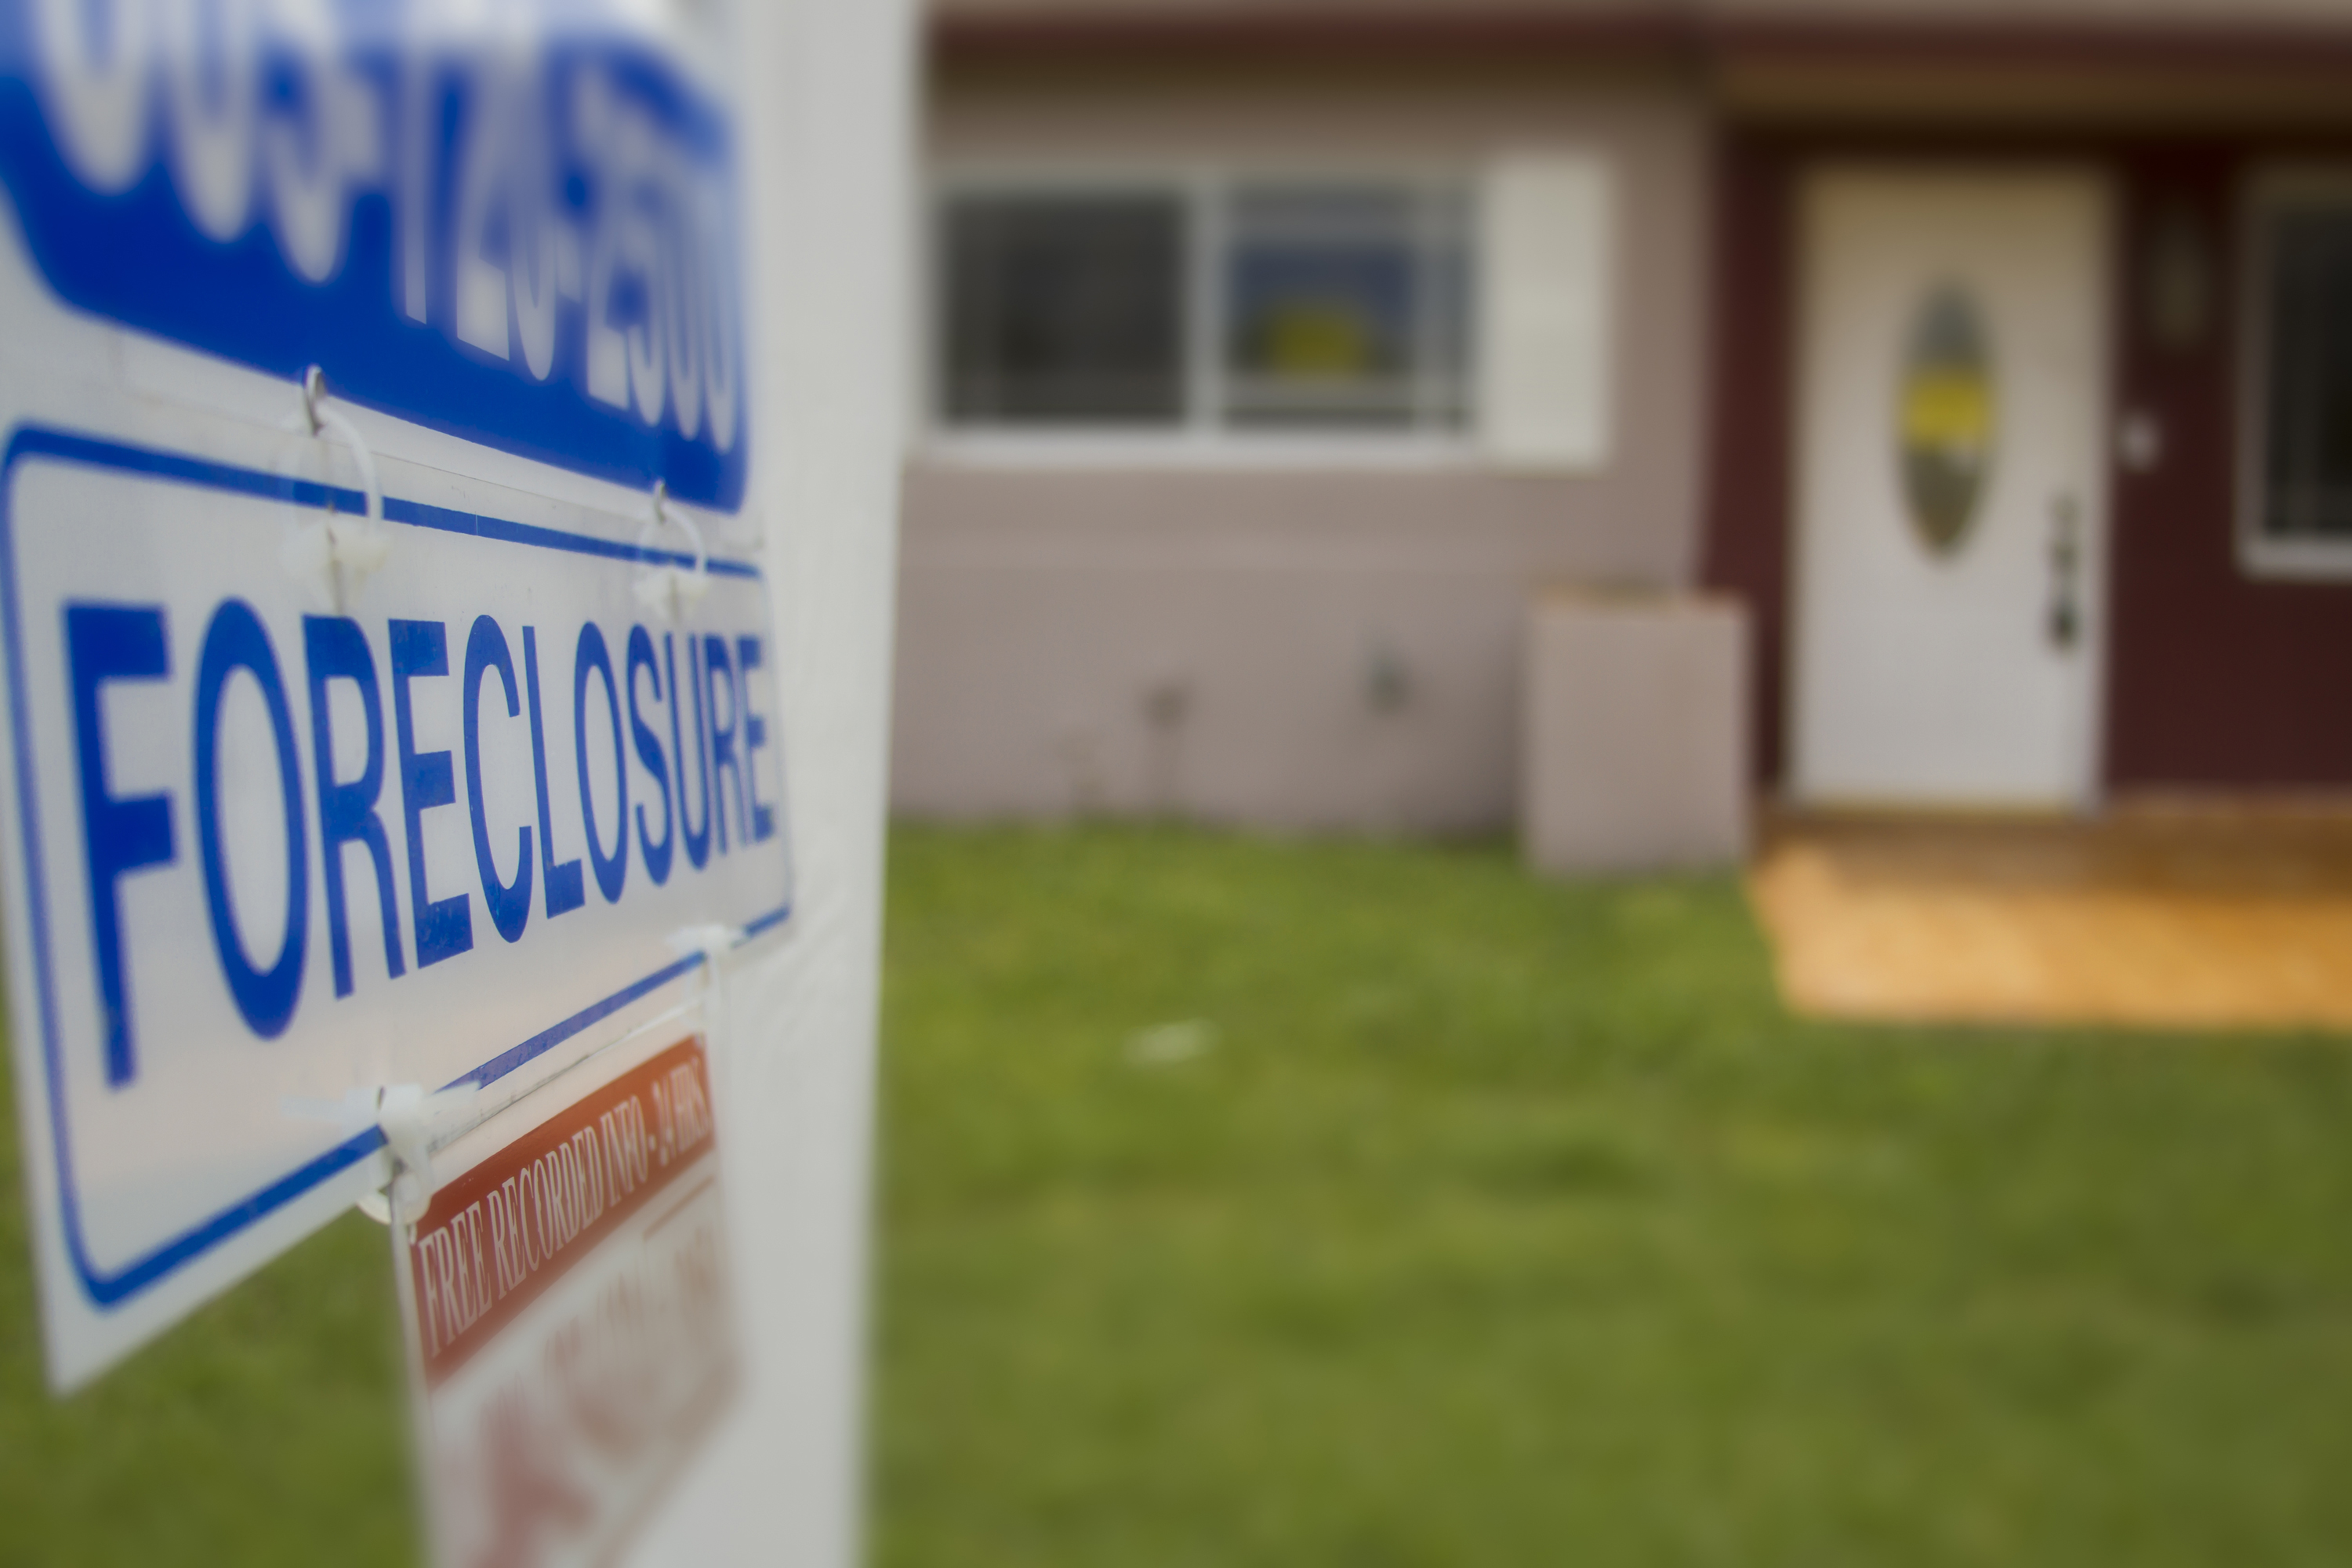 State legislators have been trying to help homeowners with foreclosure cases.